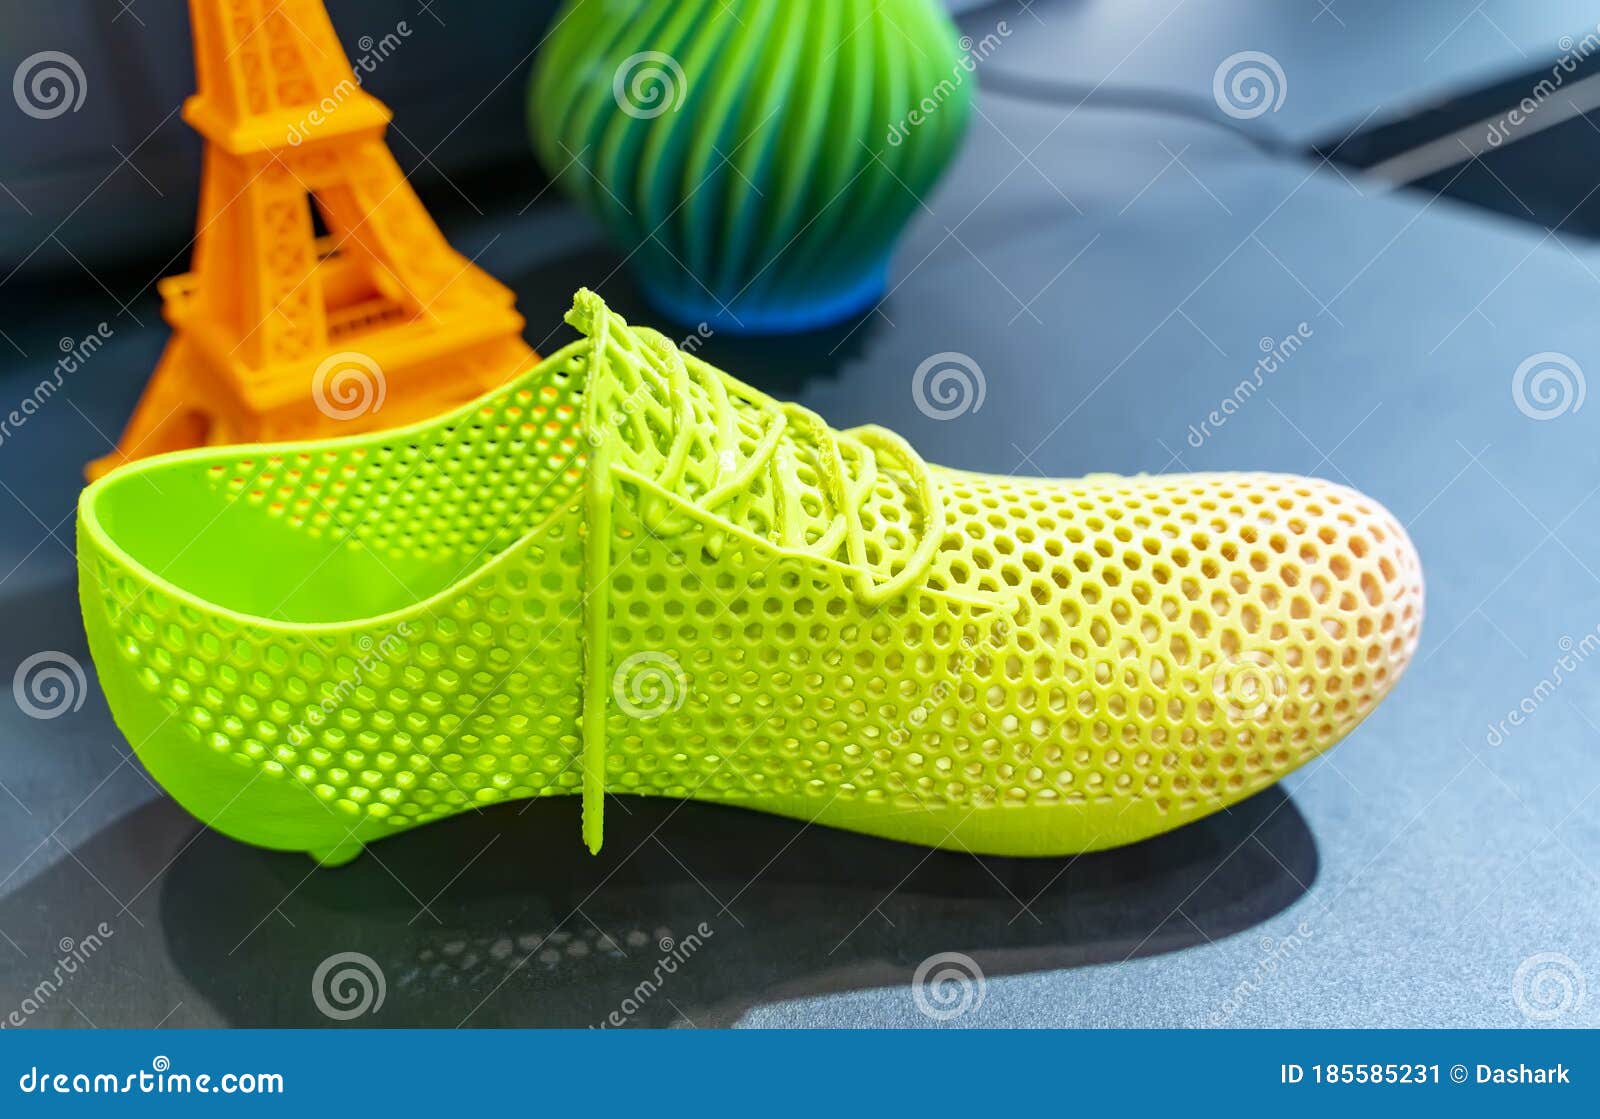 46,530 Sneaker Sole Images, Stock Photos, 3D objects, & Vectors